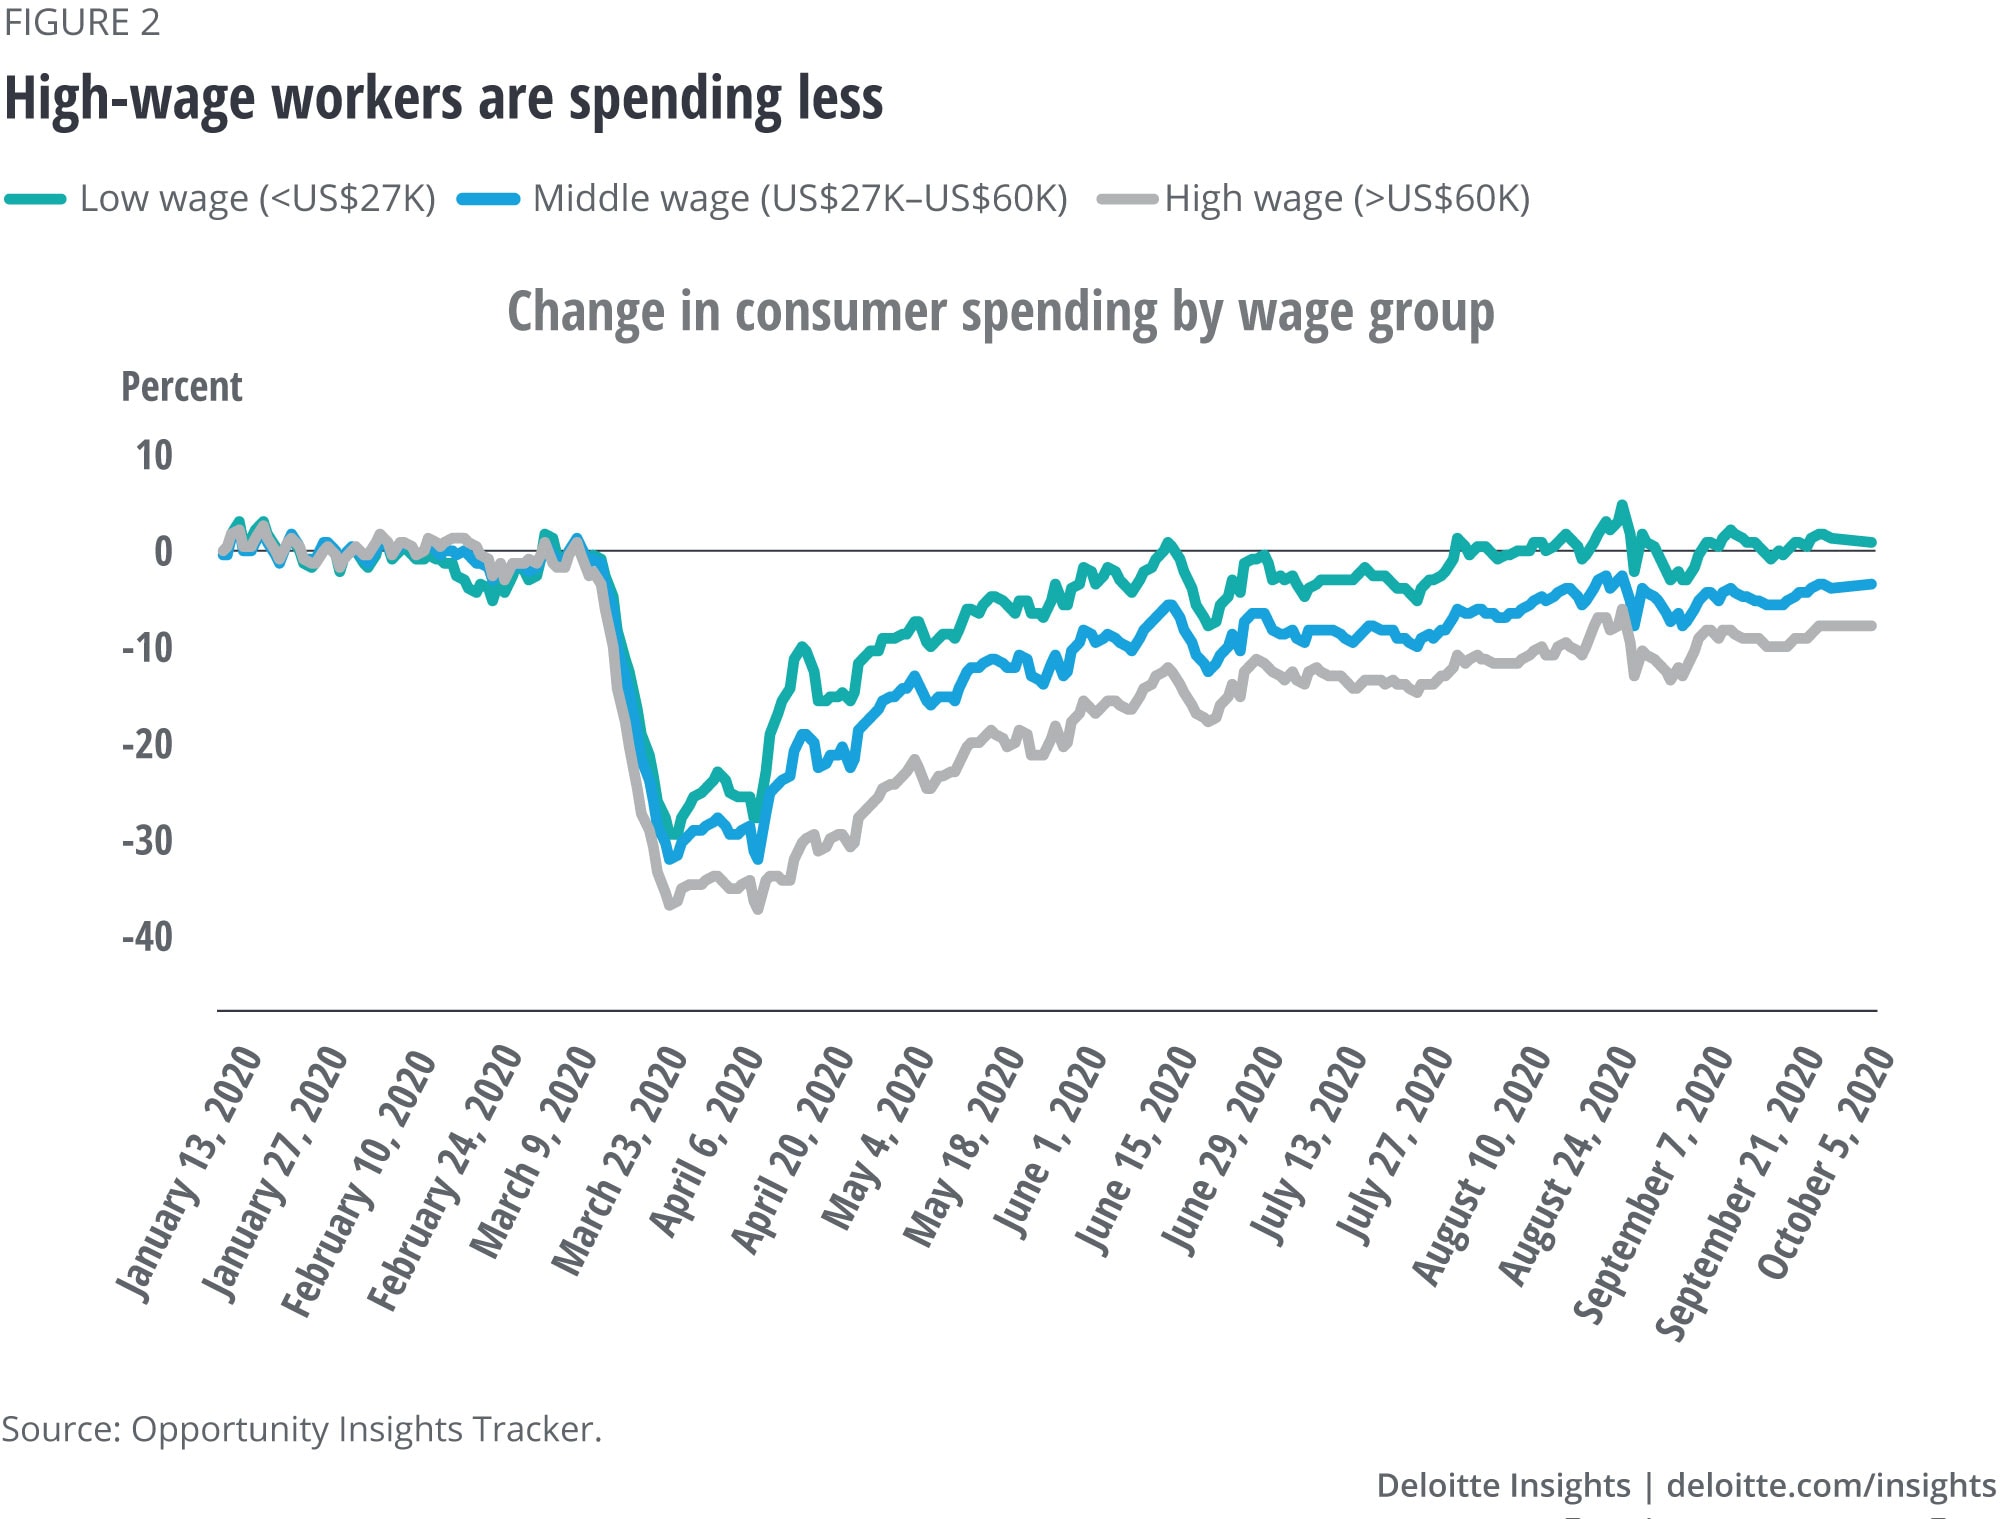 High-wage workers are spending less